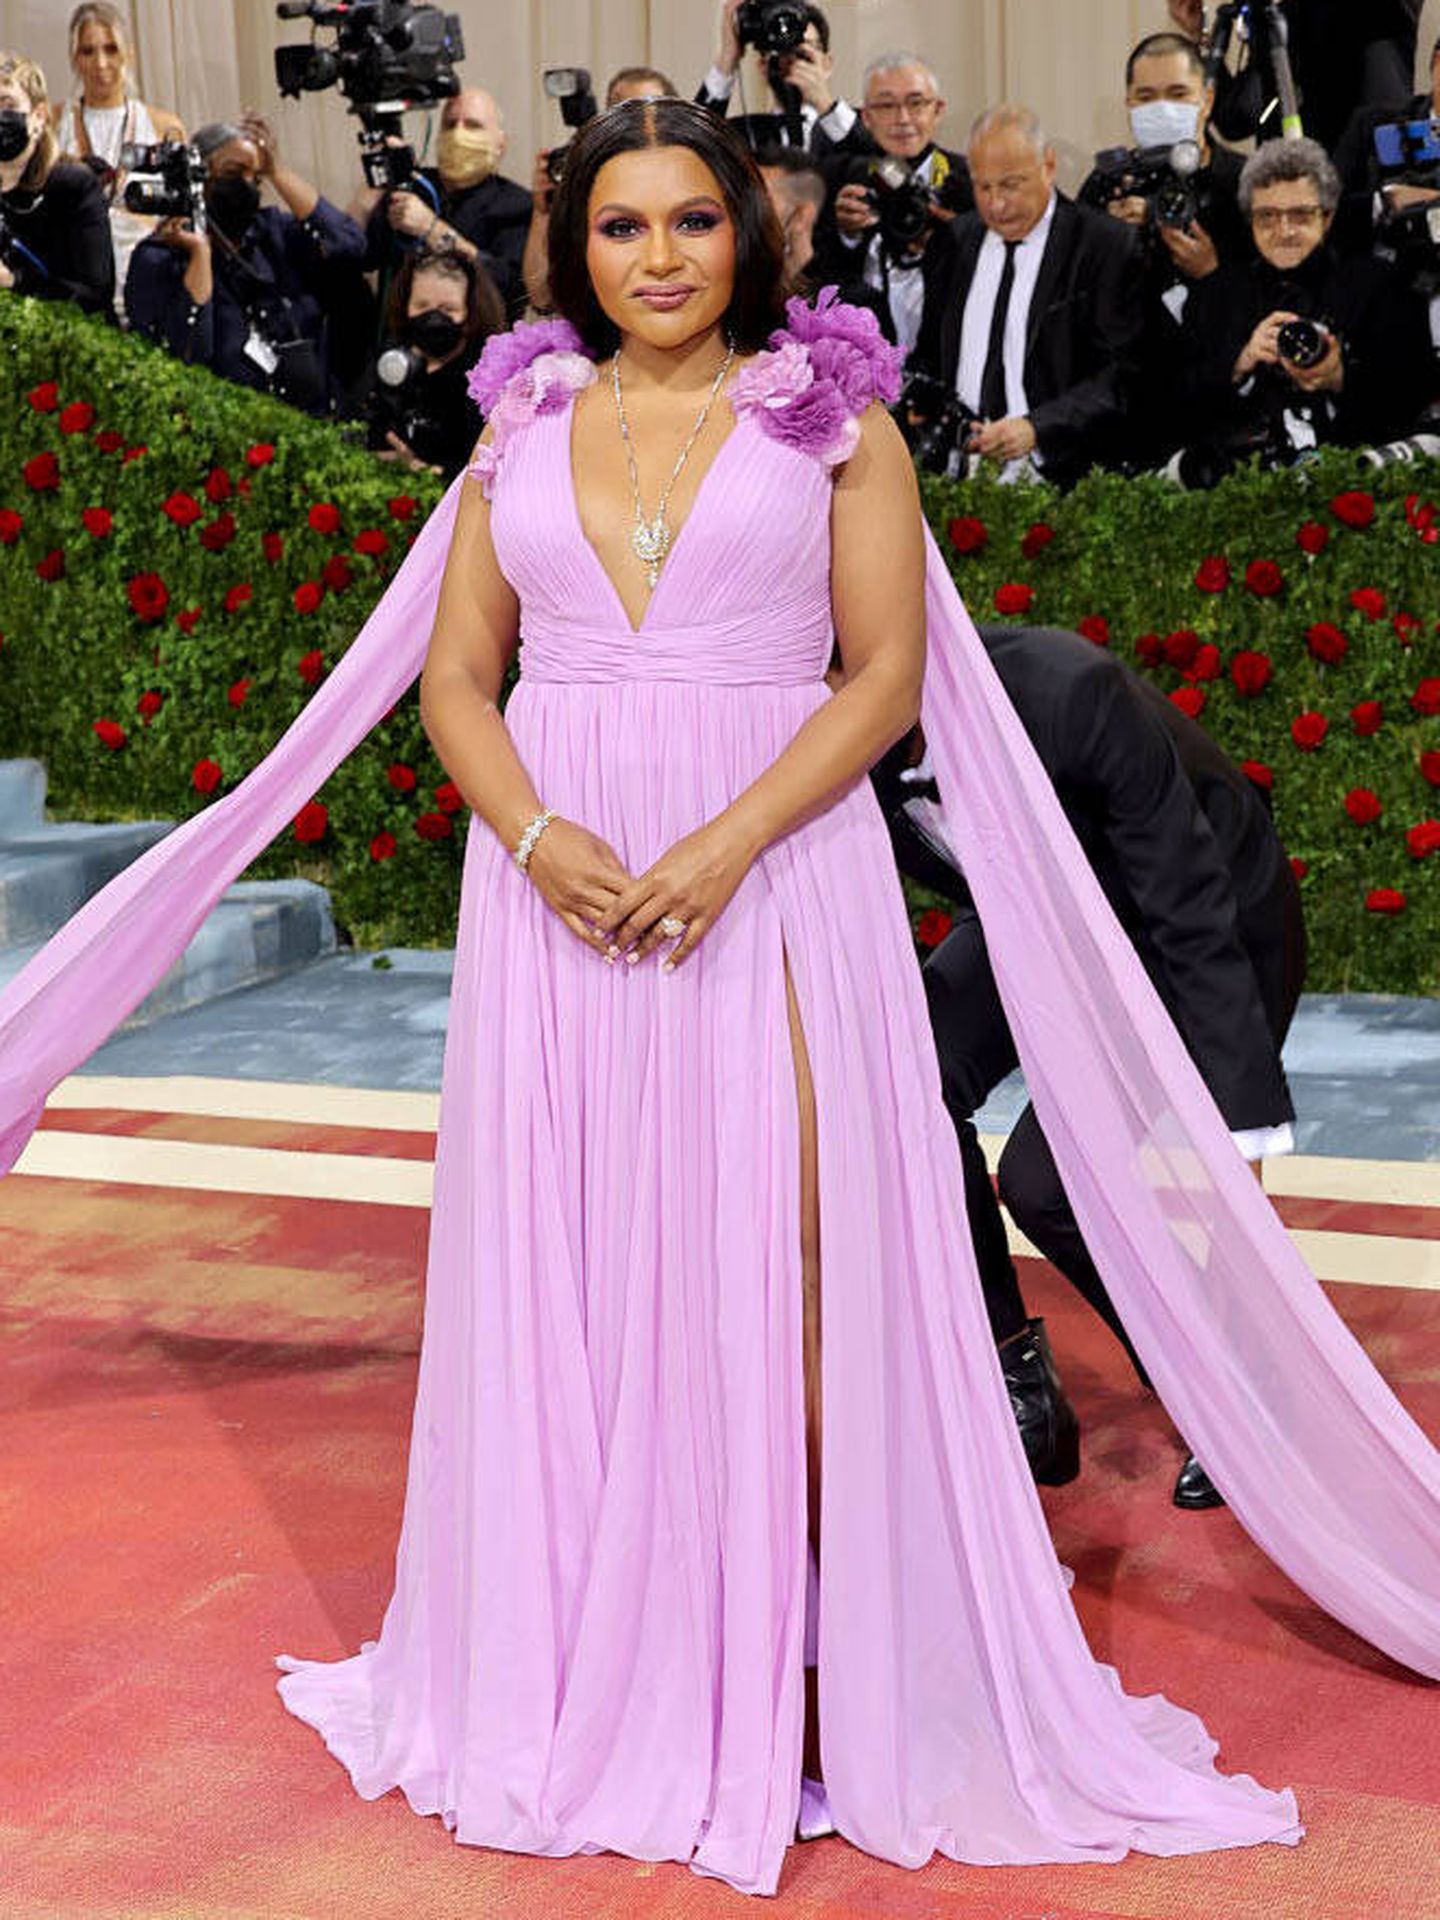 Mindy Kaling. (Getty/Mike Coppola)